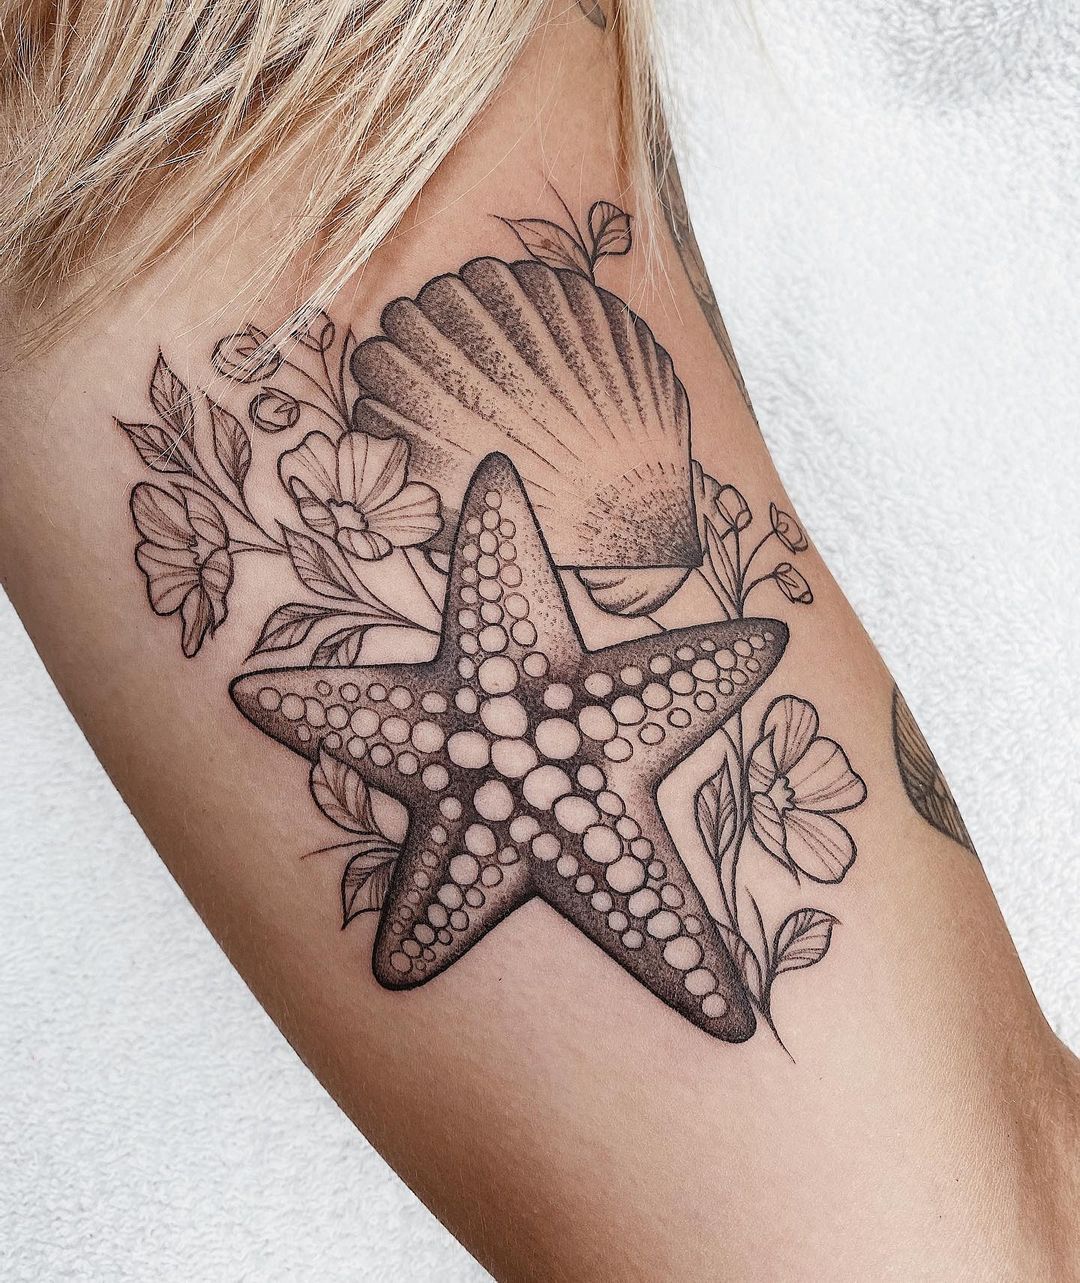 Sea Creature Tattoos Inspired By Strong And Resilient Souls  Cultura  Colectiva  Shell tattoos Starfish tattoo Beach tattoo